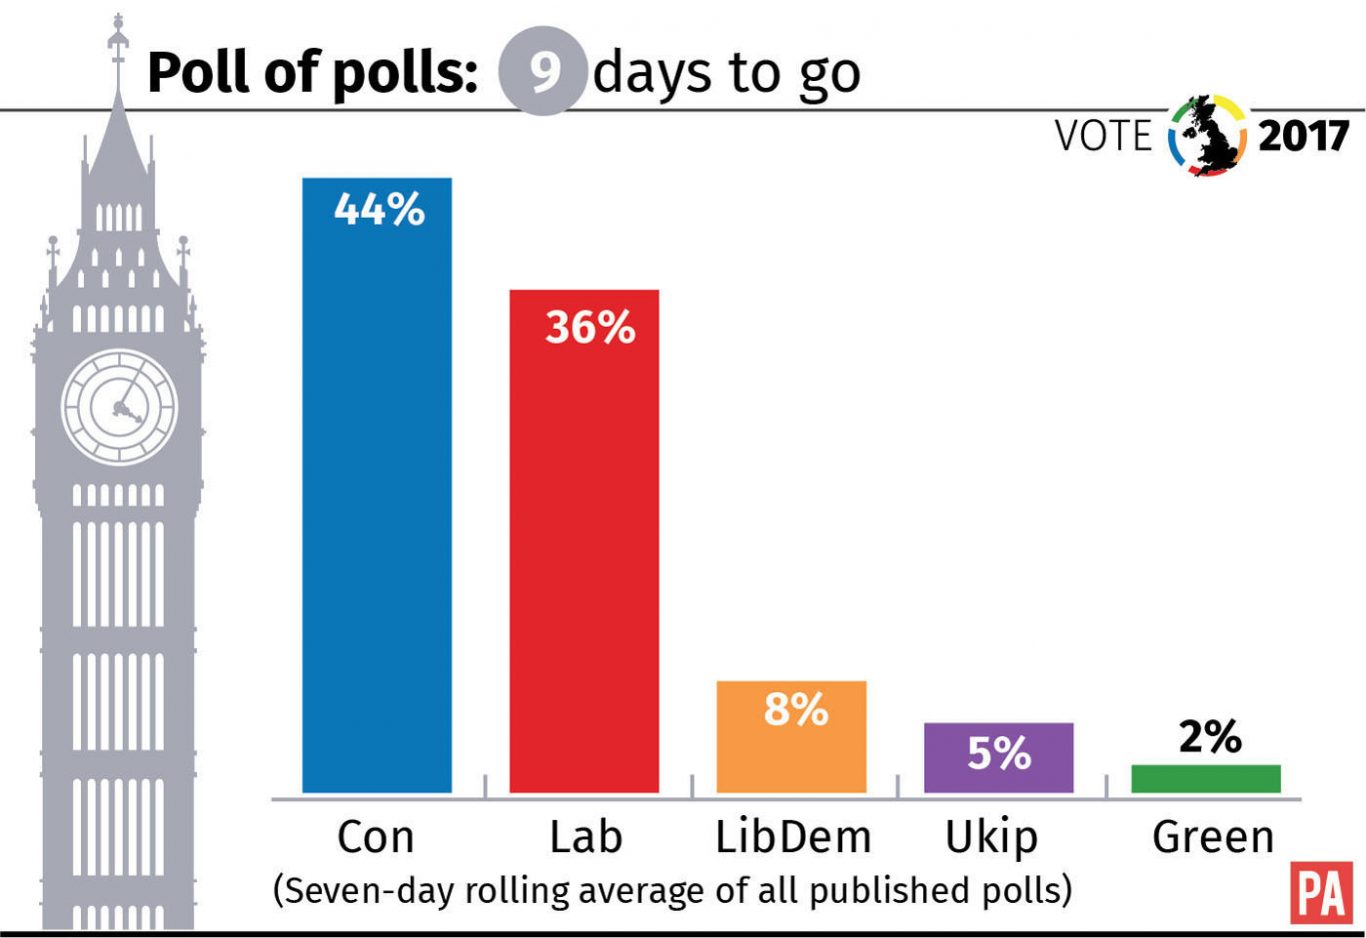 How the parties are faring in the poll of polls with 9 days to go to the general election.